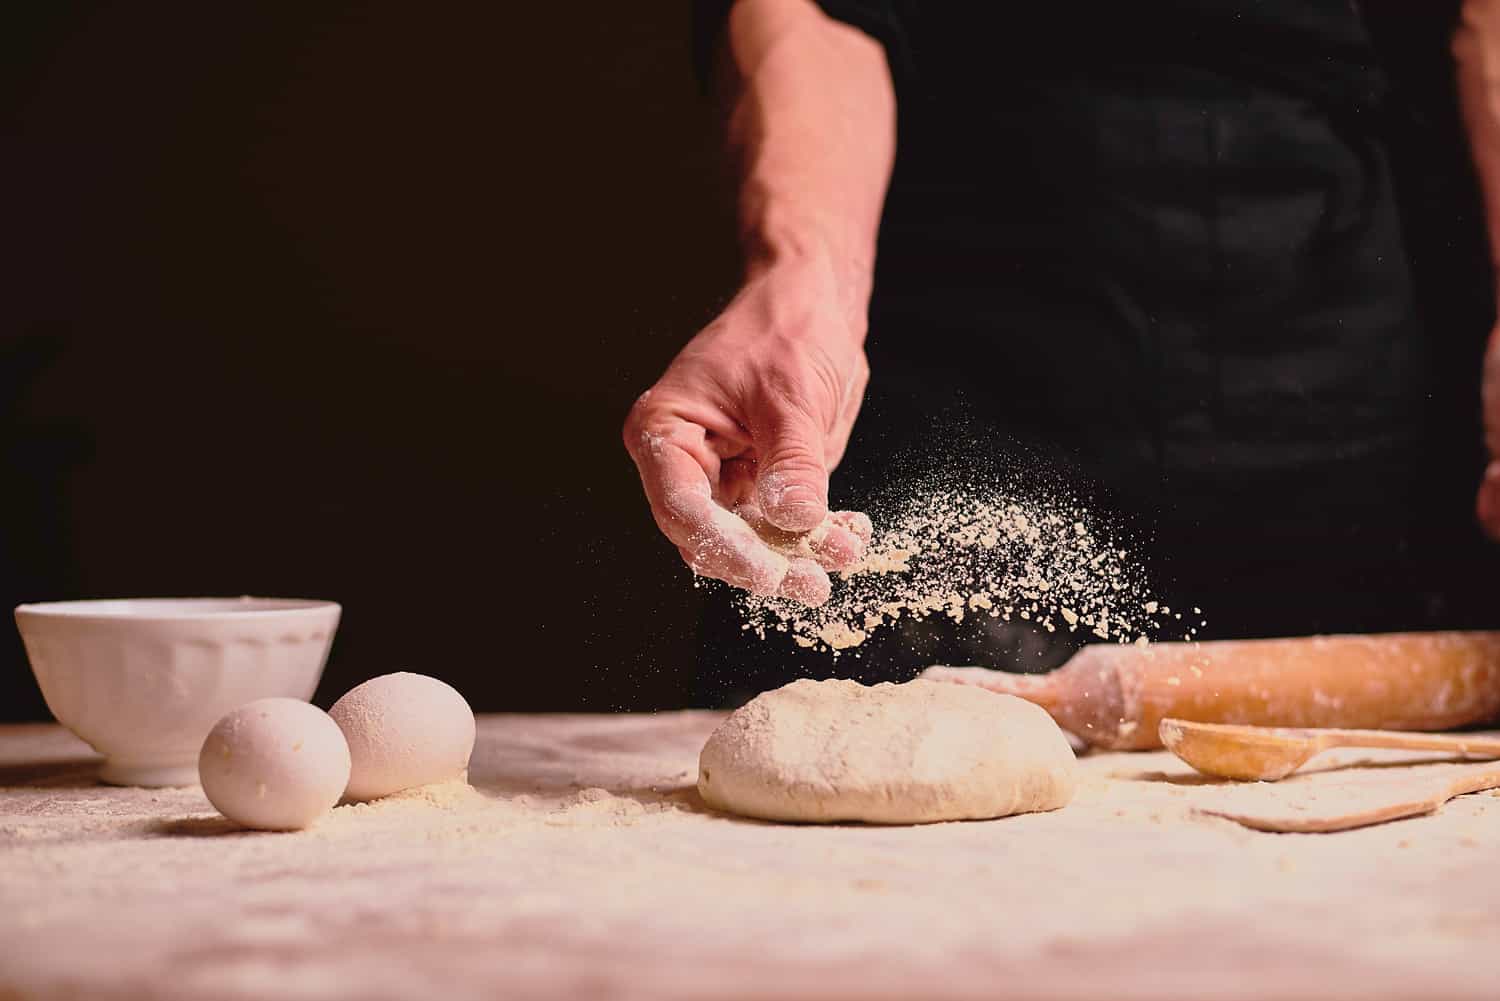 knead the dough, cook the dough on a dark background.